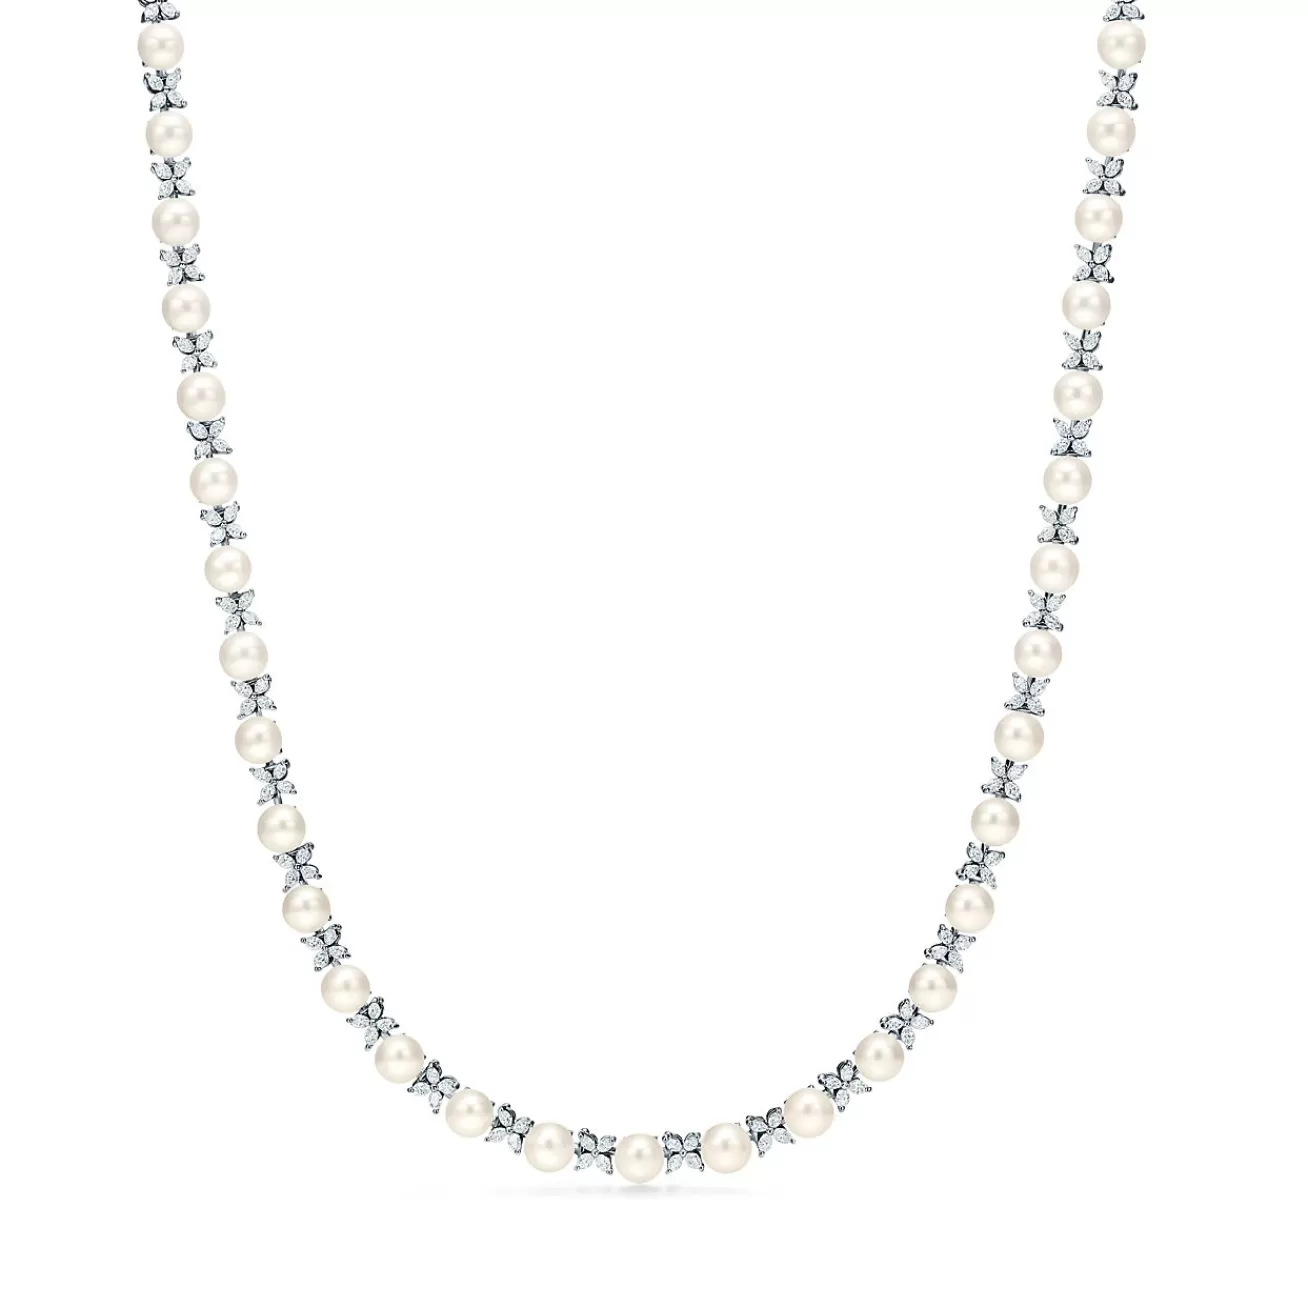 Tiffany & Co. Tiffany Victoria® necklace in platinum with Akoya pearls and diamonds. | ^ Necklaces & Pendants | Platinum Jewelry